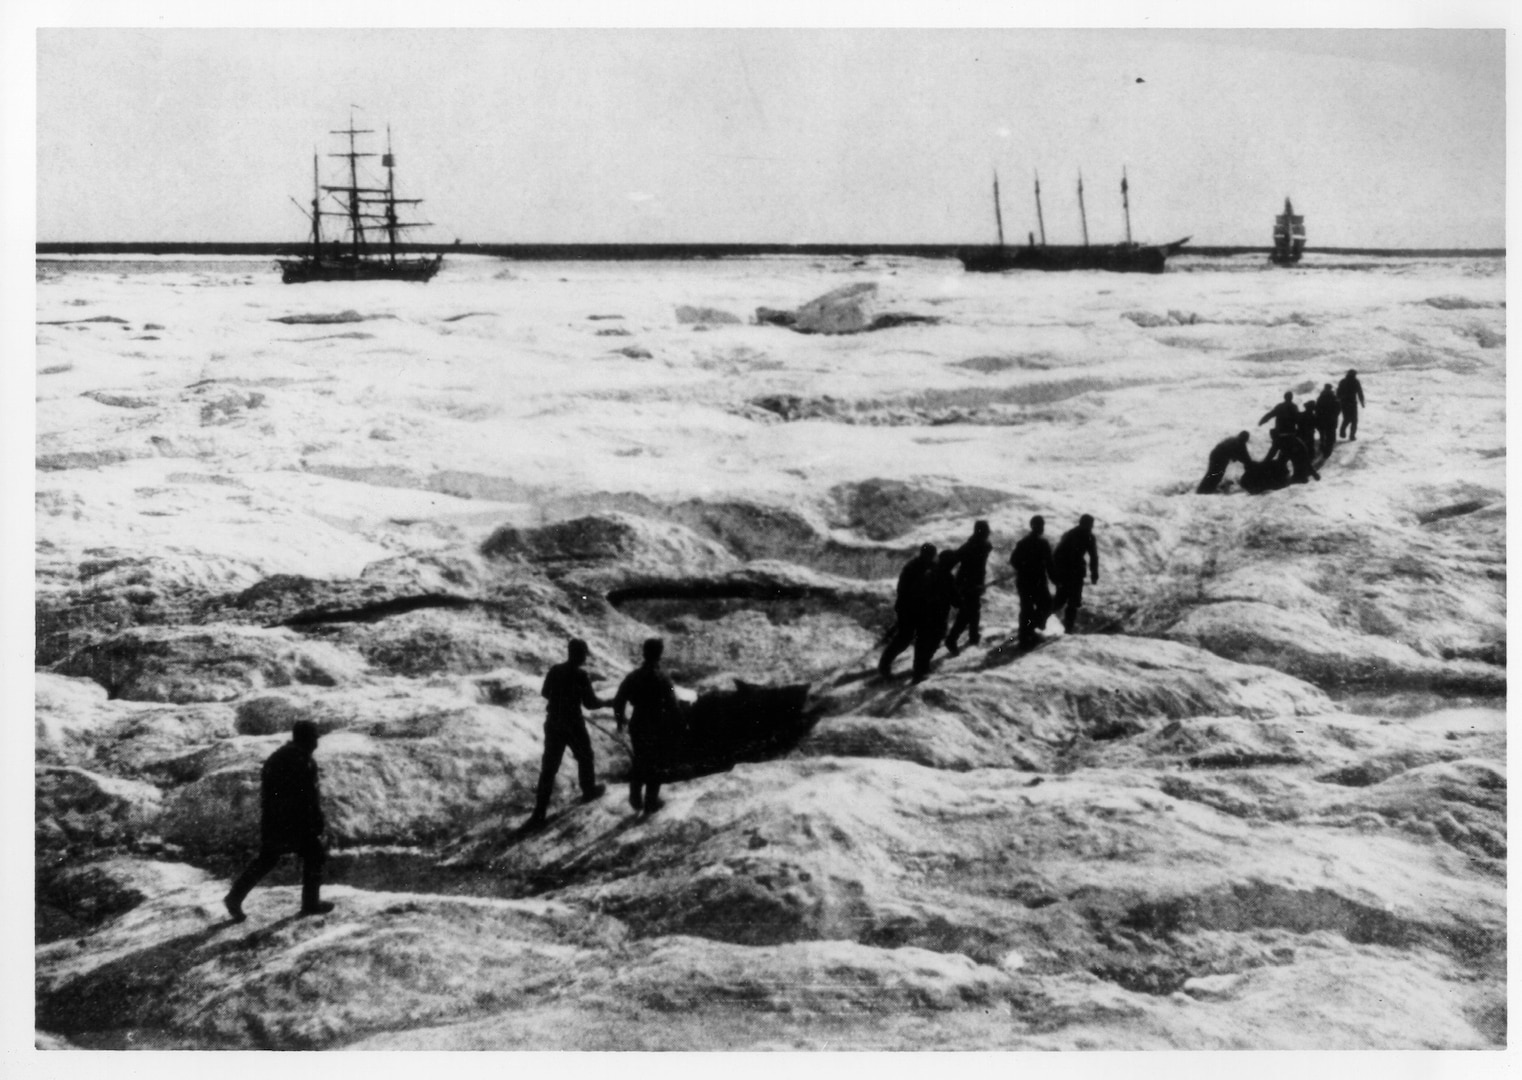 Personnel of the RCS Overland Expedition approach the stranded whaling fleet in 1898.